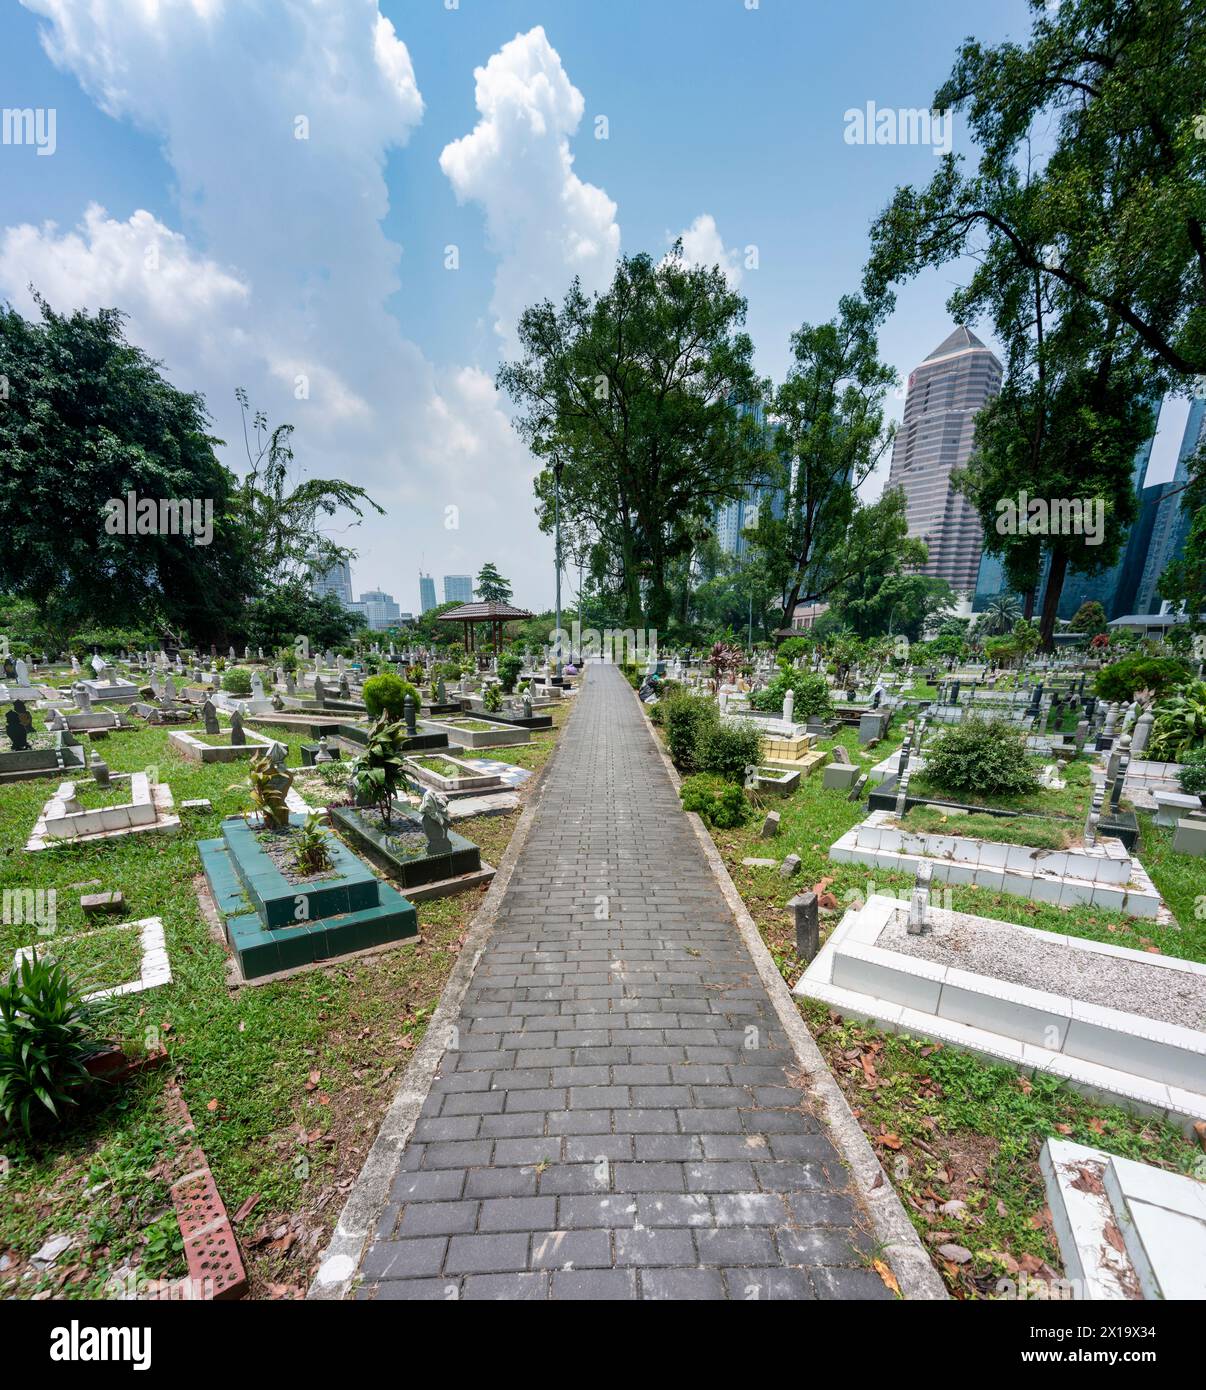 Tucked away off Jln Ampang and split from Kampung Baru by a highway is one of KL's oldest Muslim burial grounds. It's shaded by giant banyans and rain Stock Photo